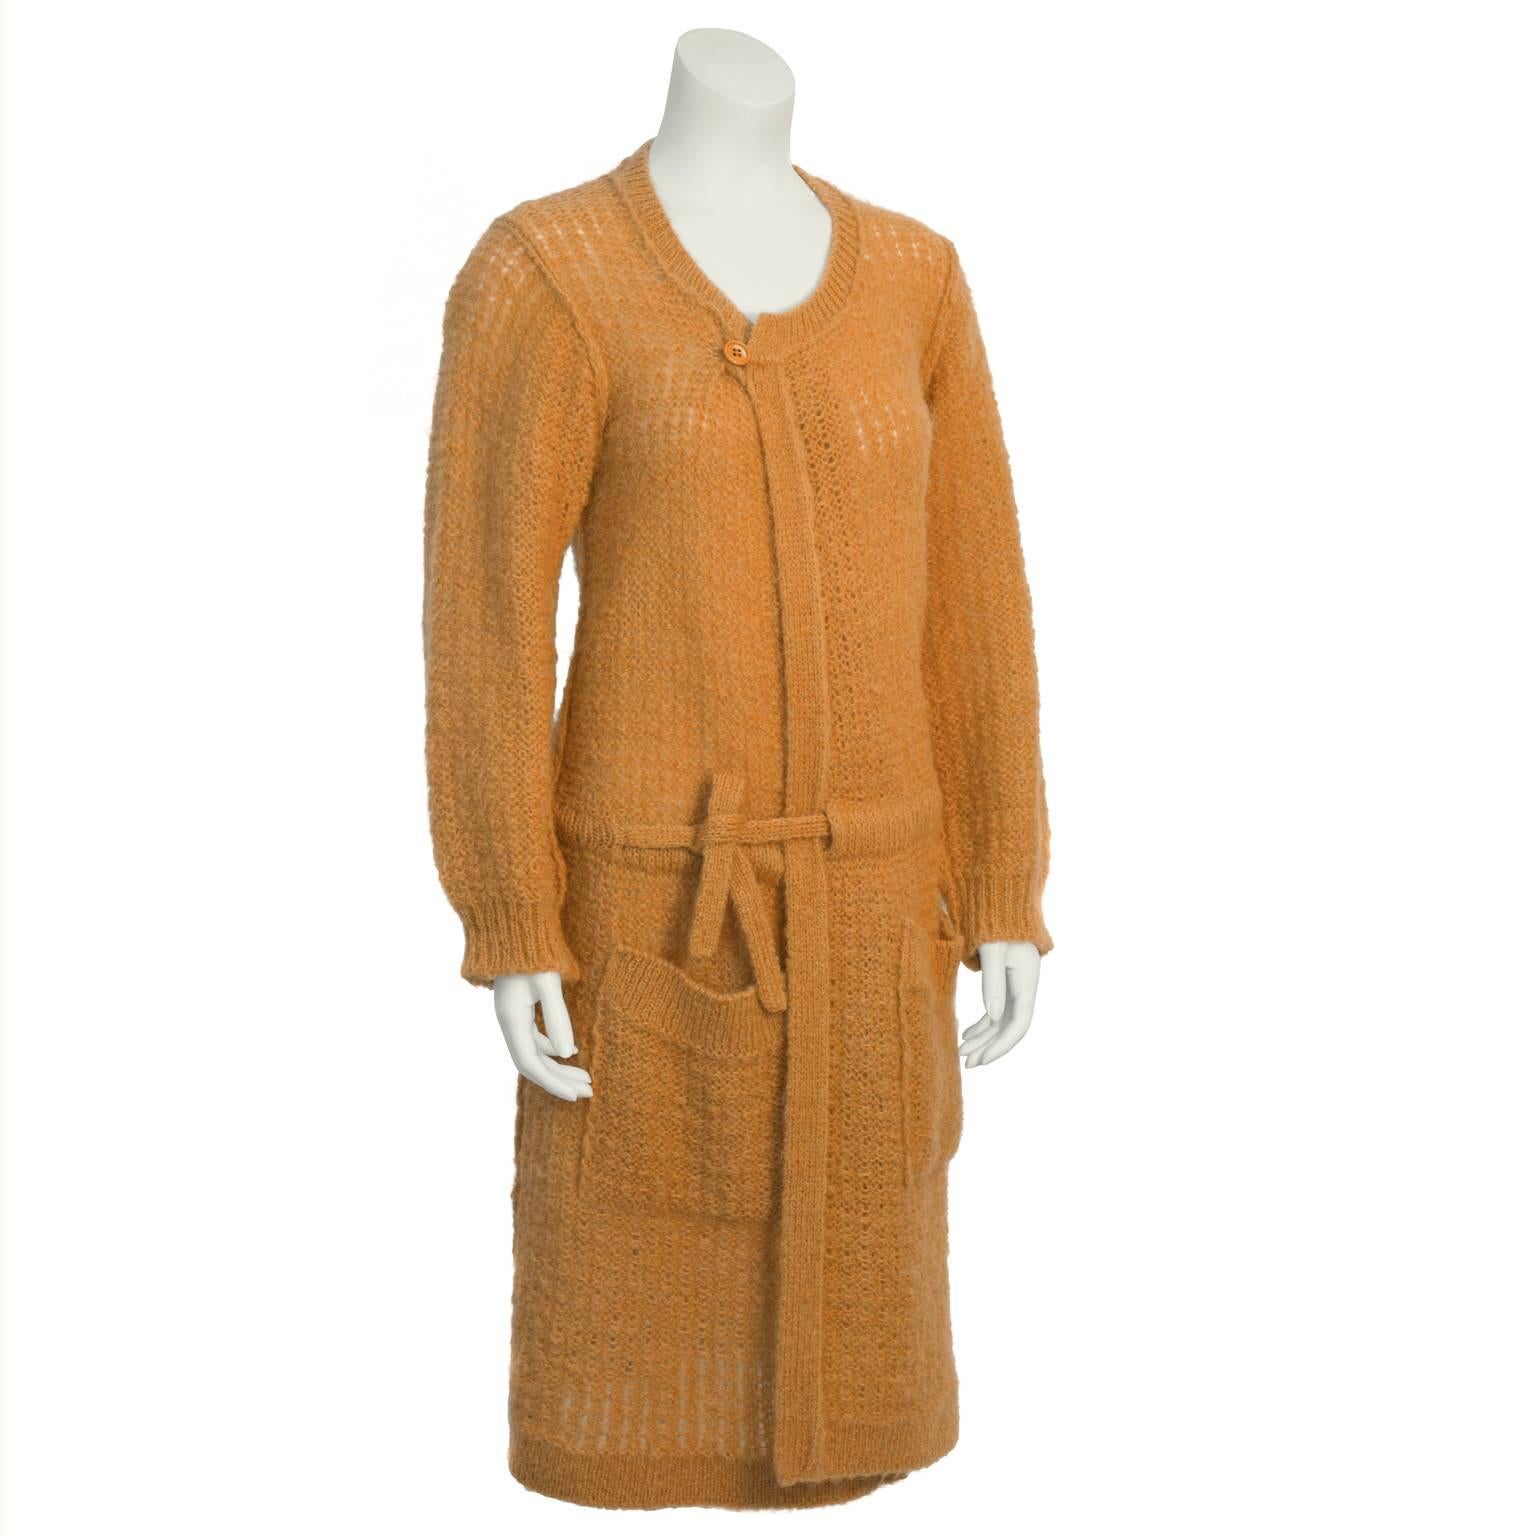 Cozy peach wool hand knit  Sonia Rykiel car coat style cardigan from the 1980's. Features a single button closure at the neck, and drawstring at the hip. Two over sized patch pockets at the hip. Excellent vintage condition. Flexible fit from US 4-8.